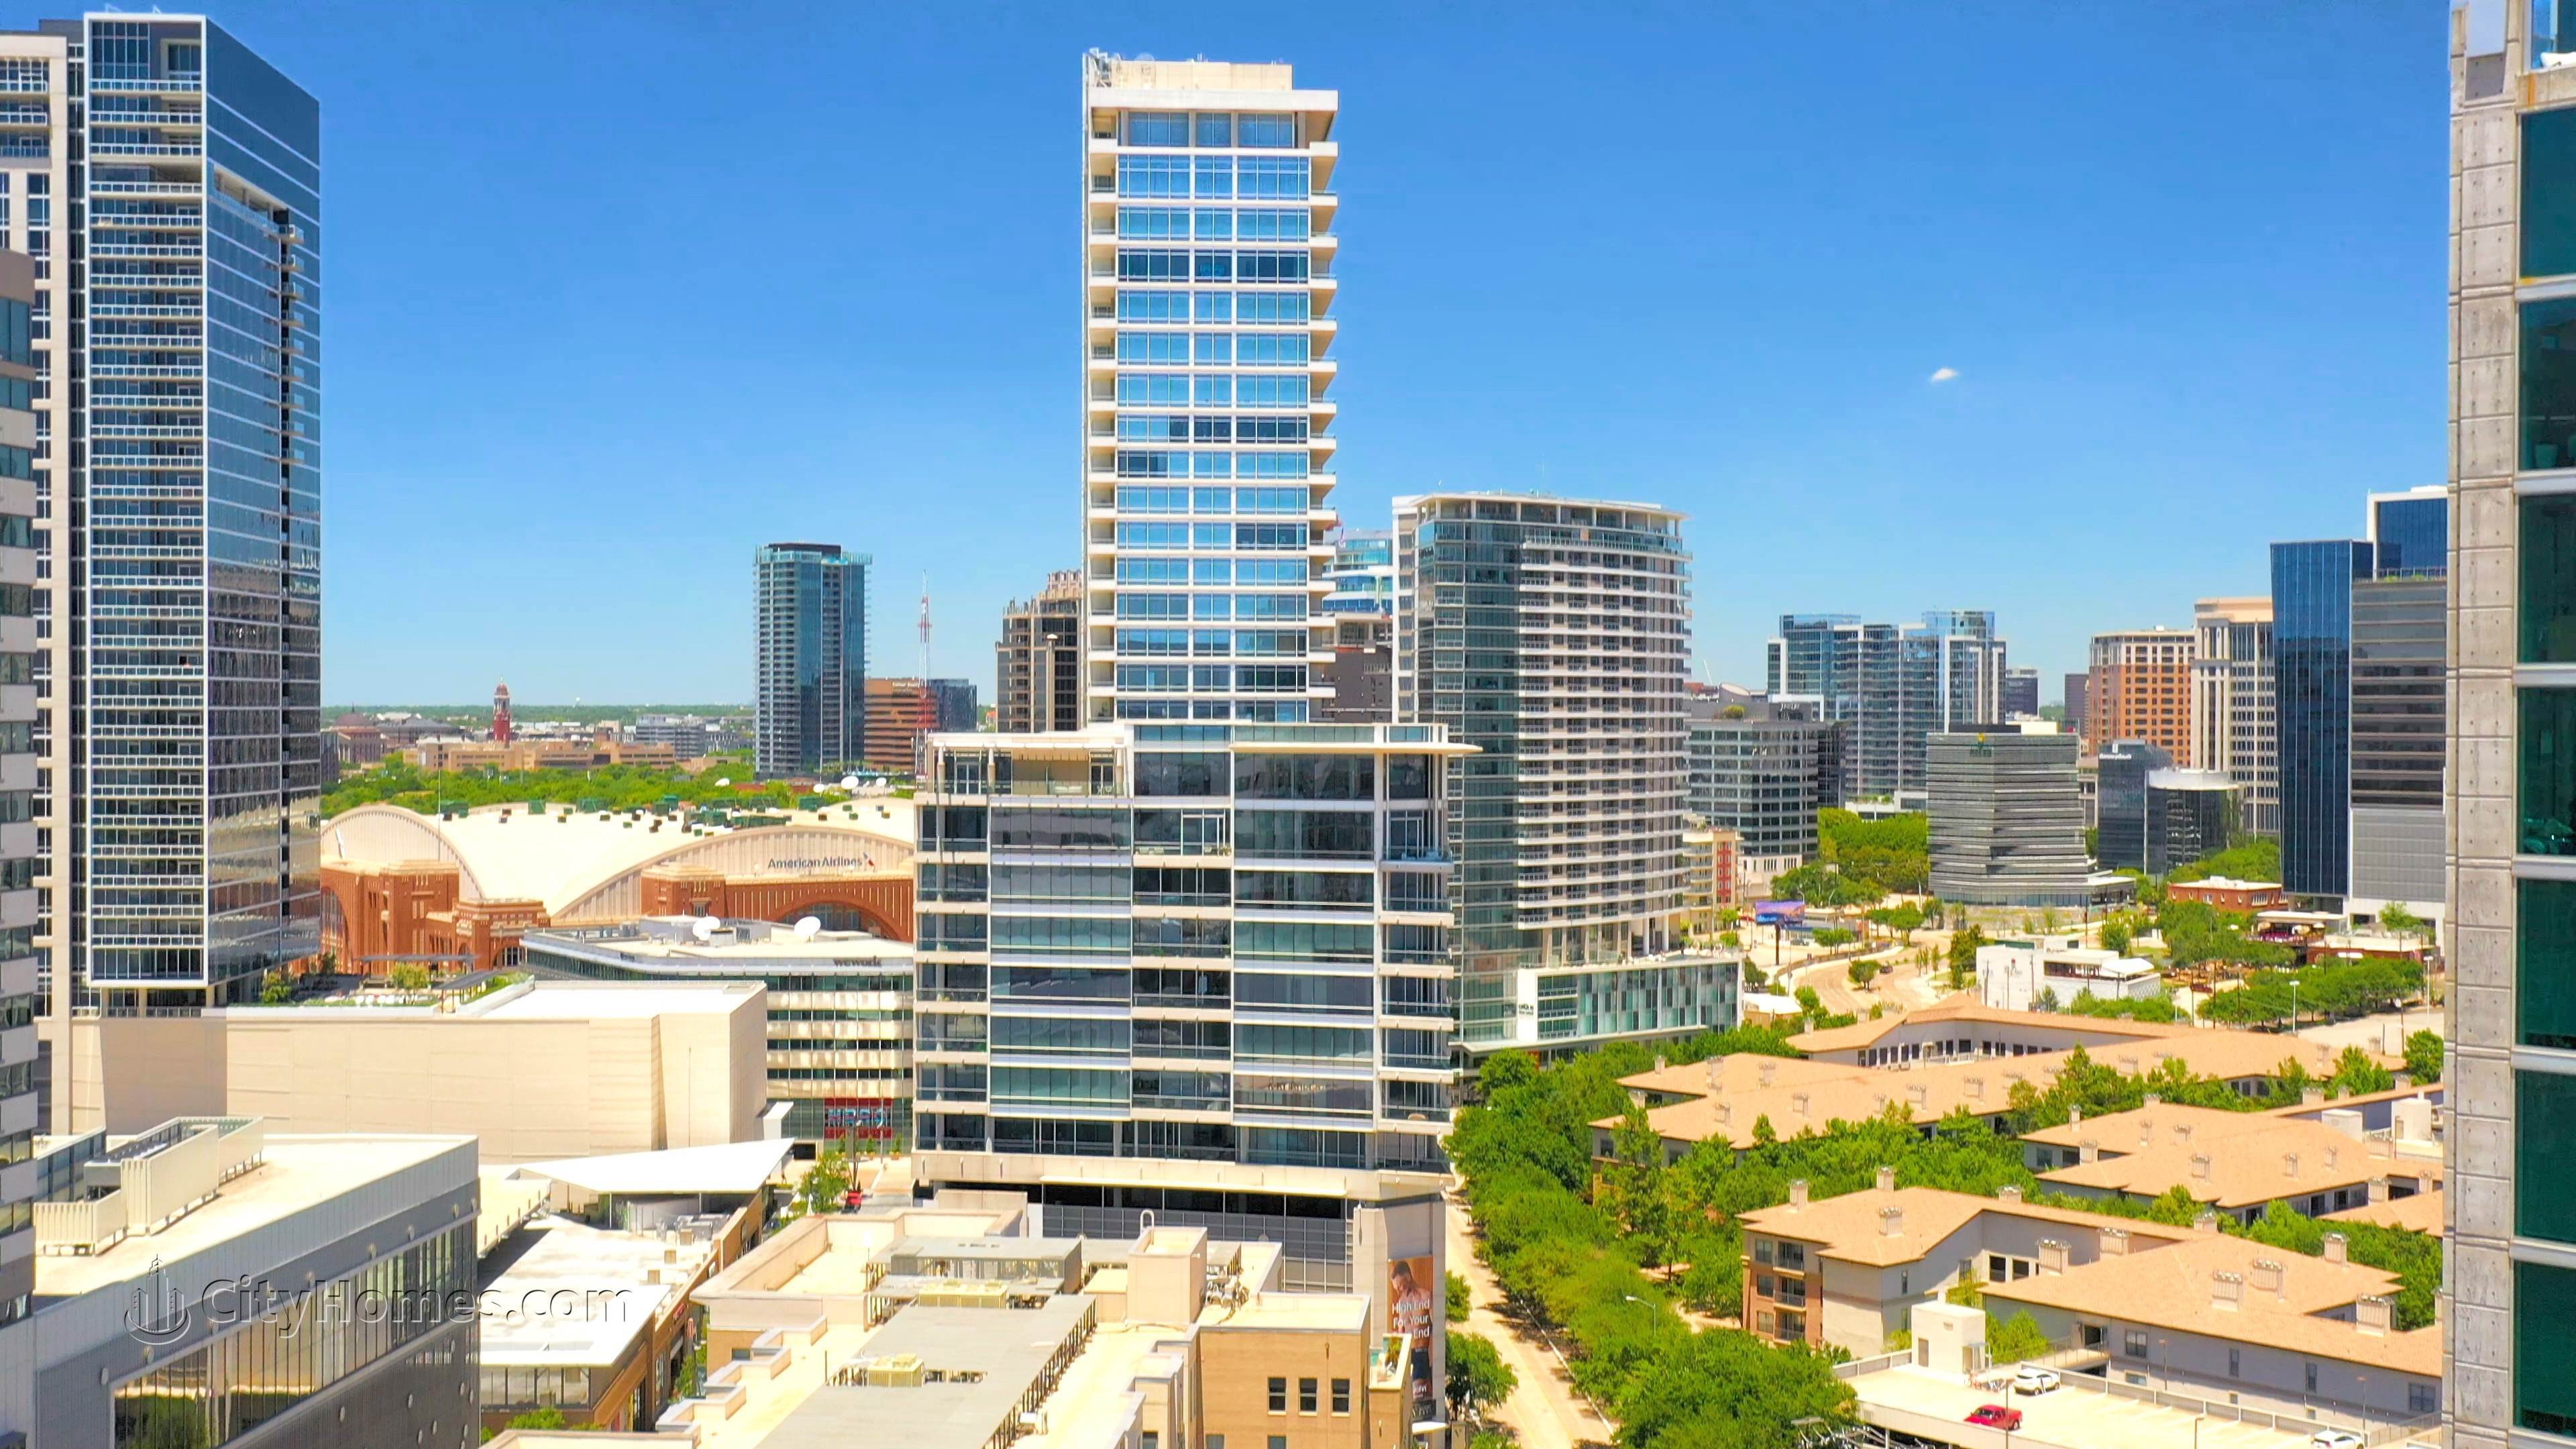 2. Stoneleigh Residences building at 2300 Wolf Street, Uptown Dallas, Dallas, TX 75201